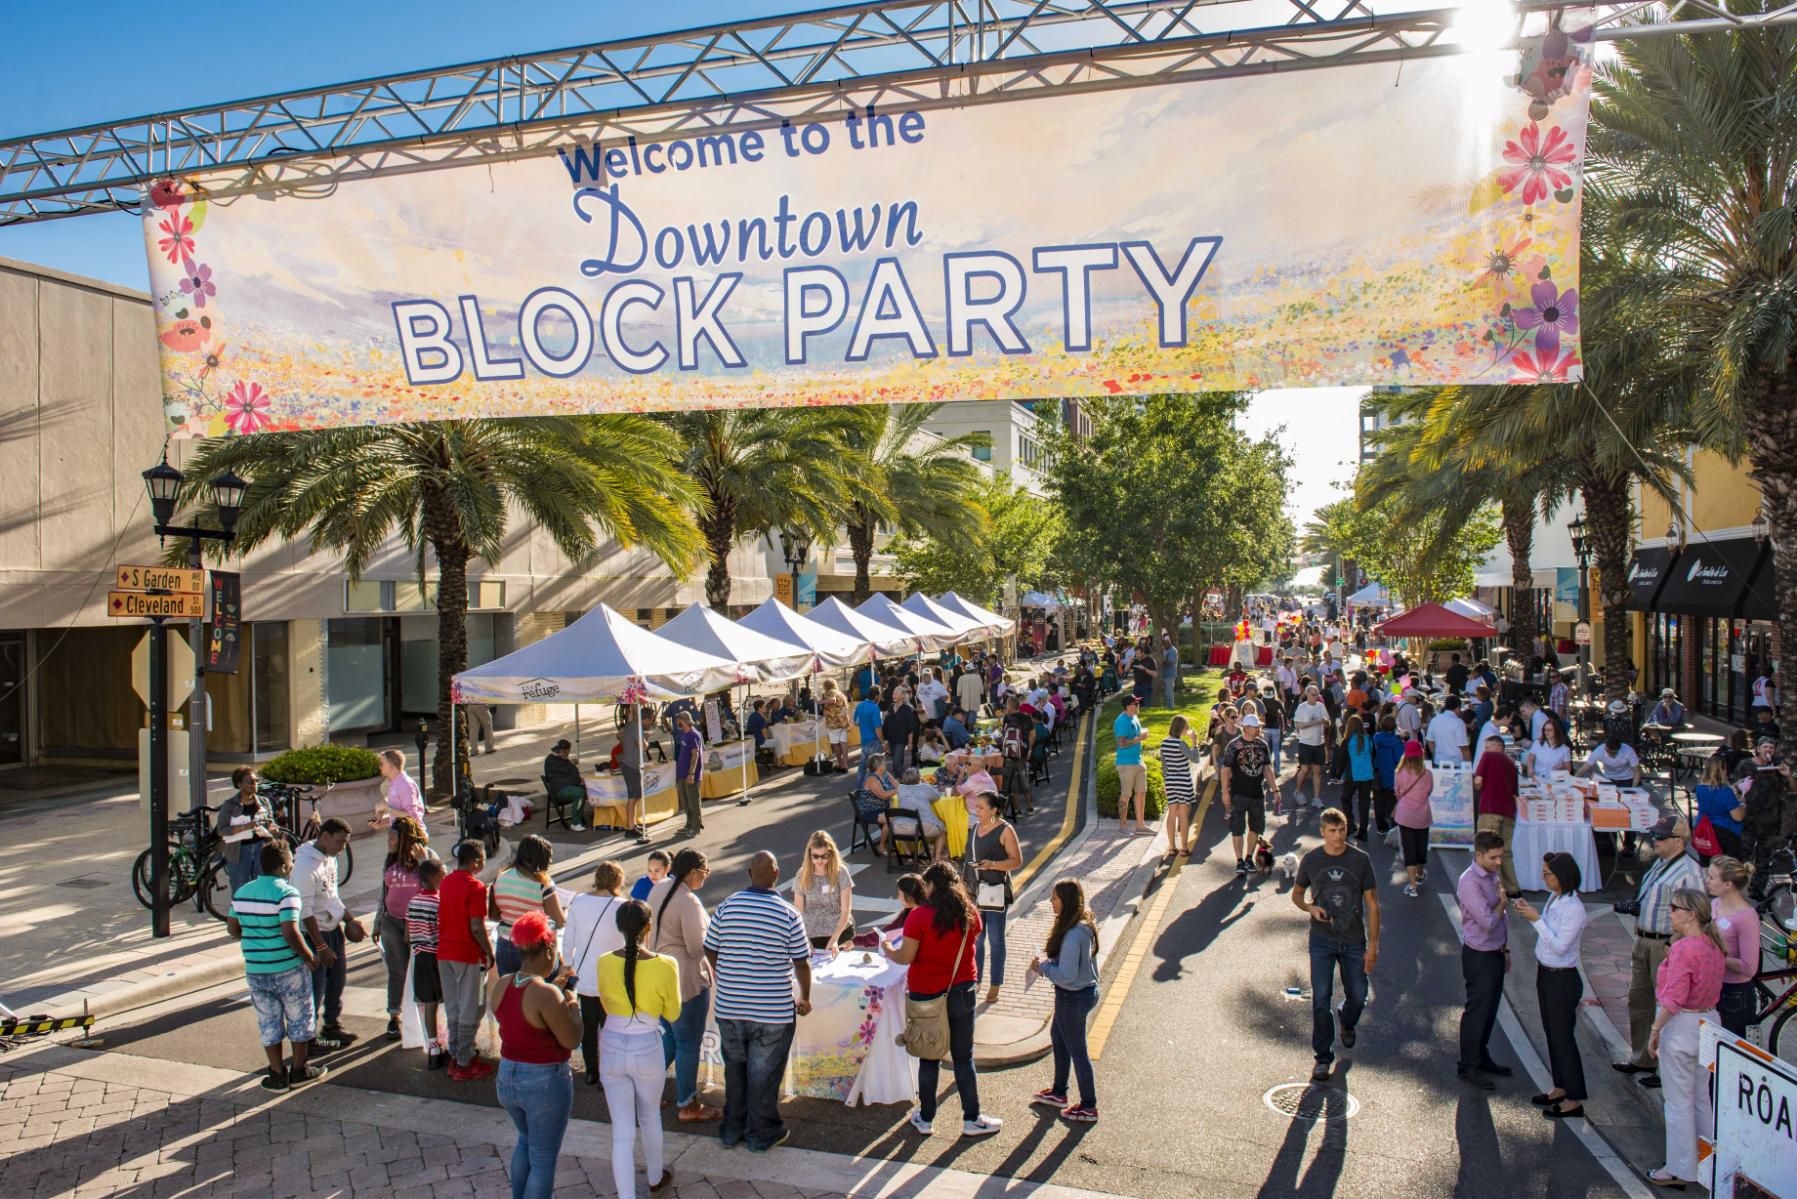 Annual block party in downtown Clearwater, sponsored by the Church of Scien...